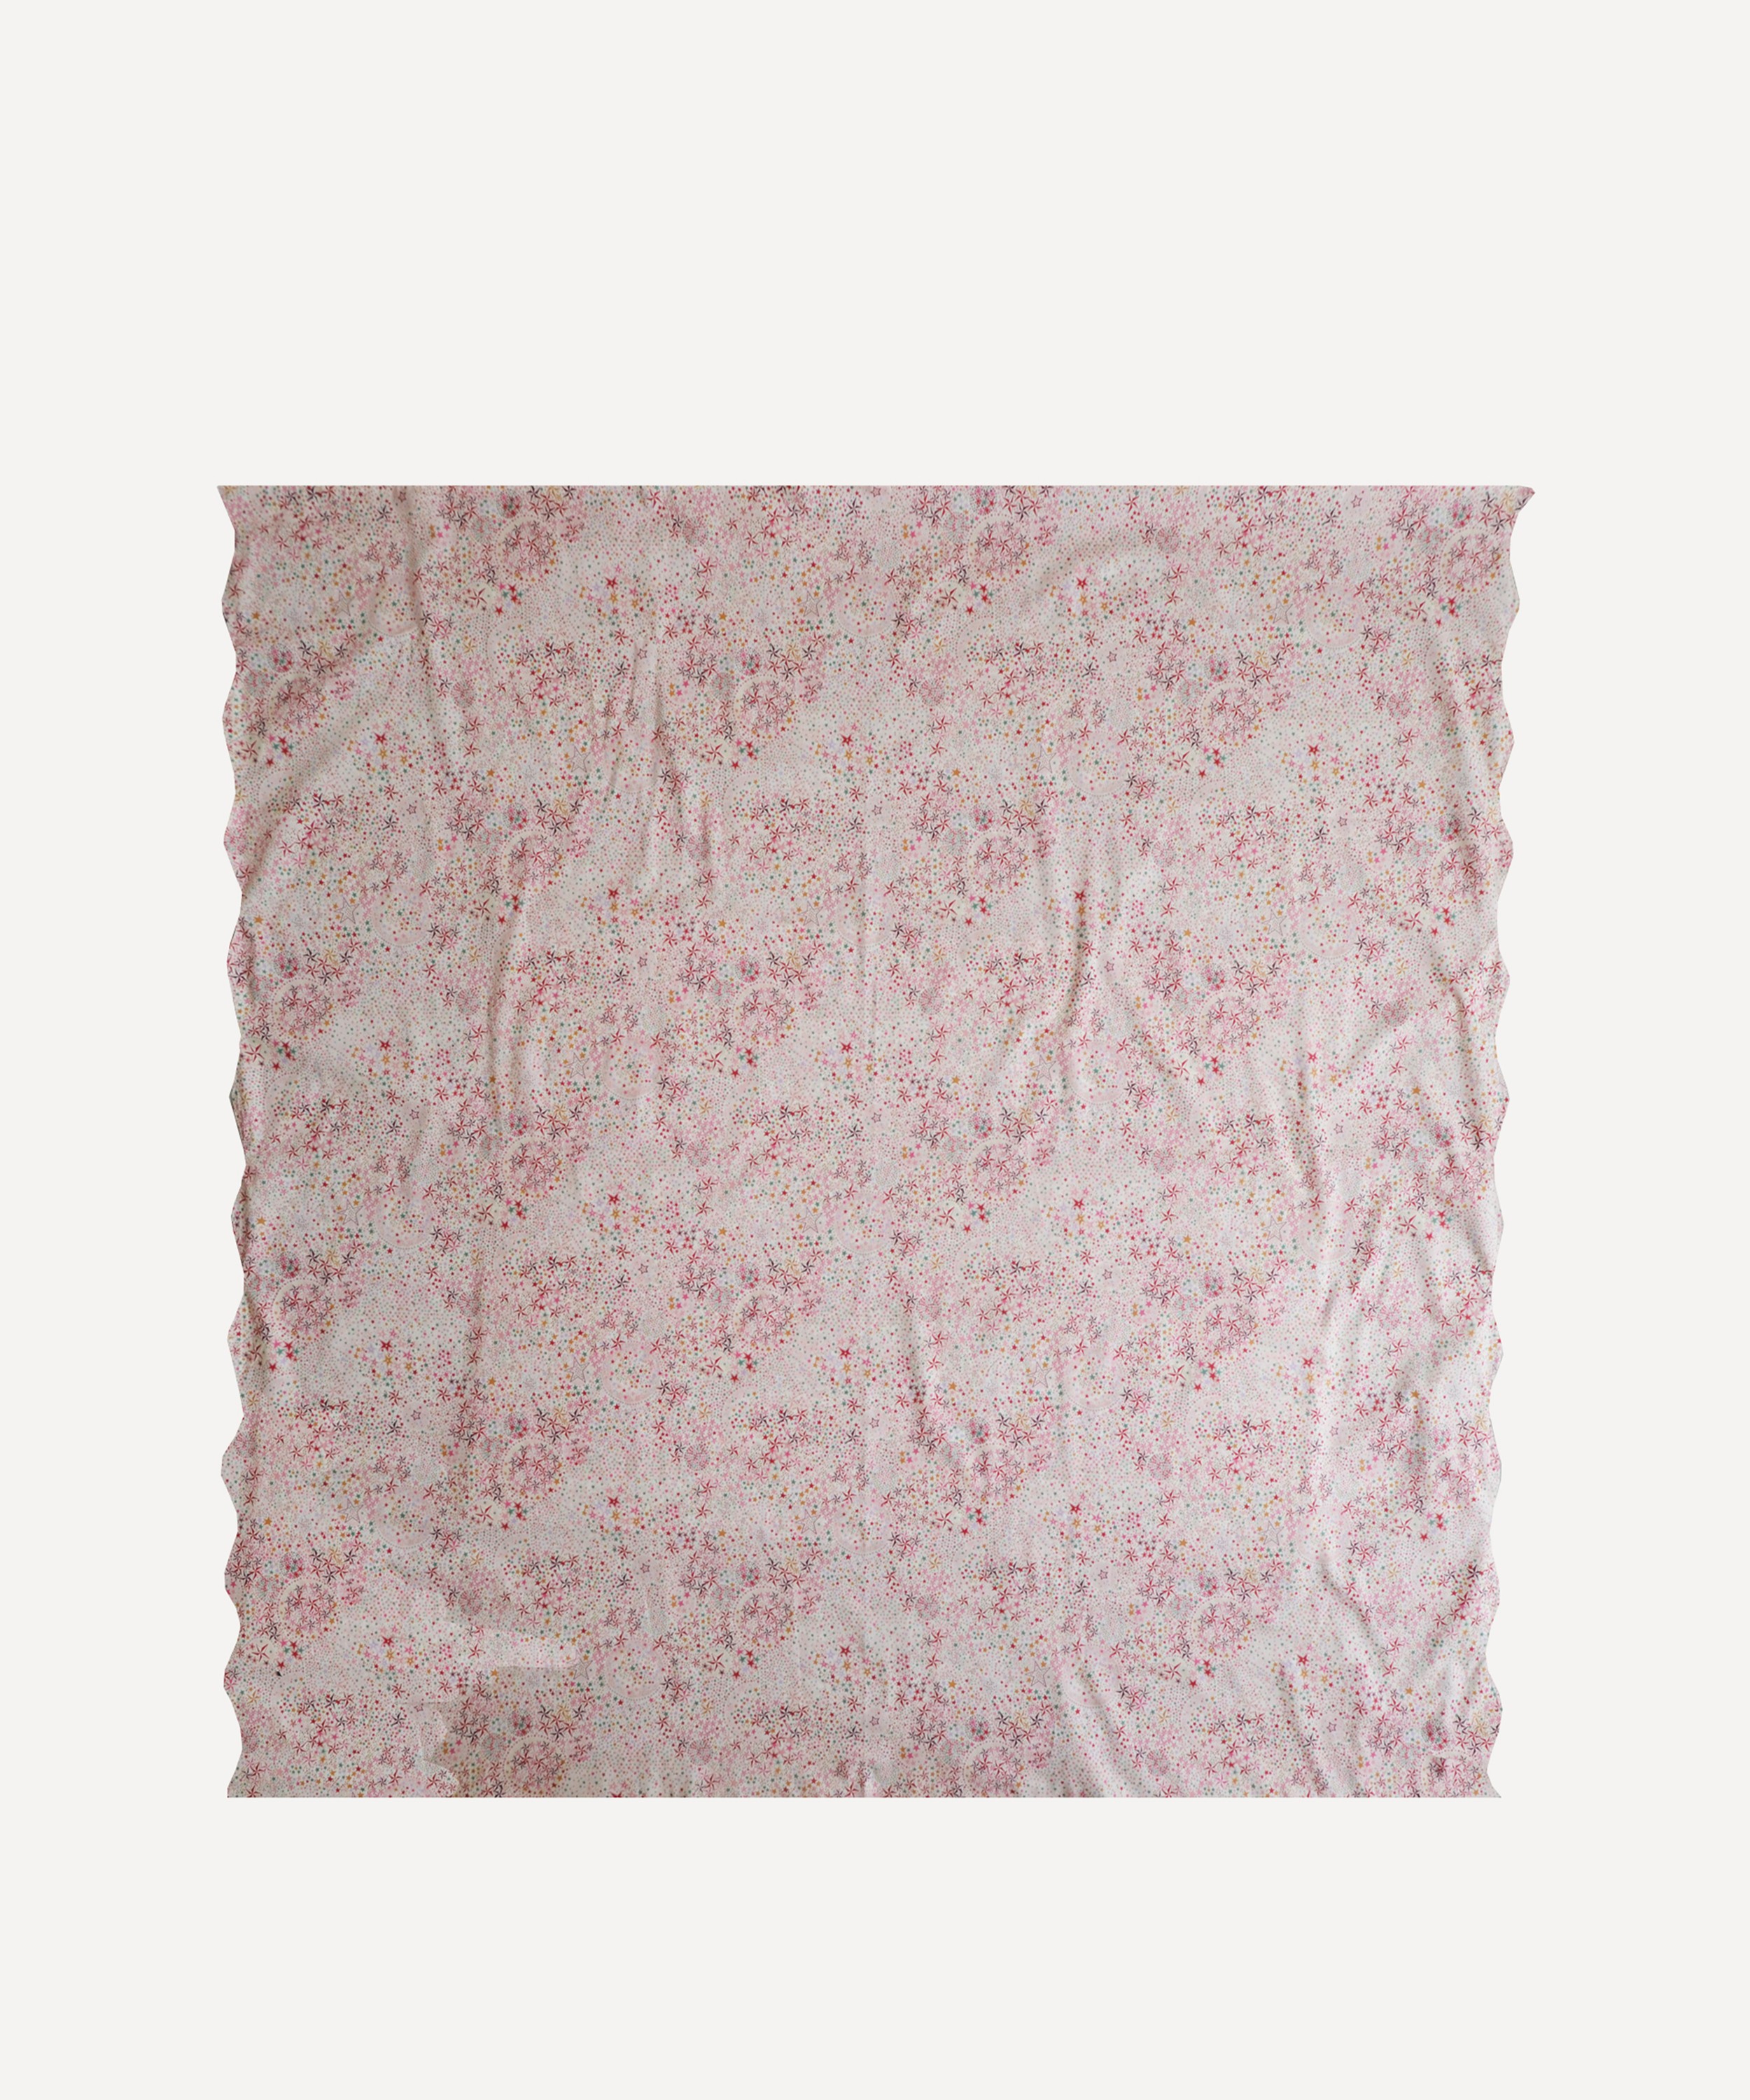 Coco & Wolf - Adelajda’s Wish and Wiltshire Stars large Wavy Edge Tablecloth image number 0